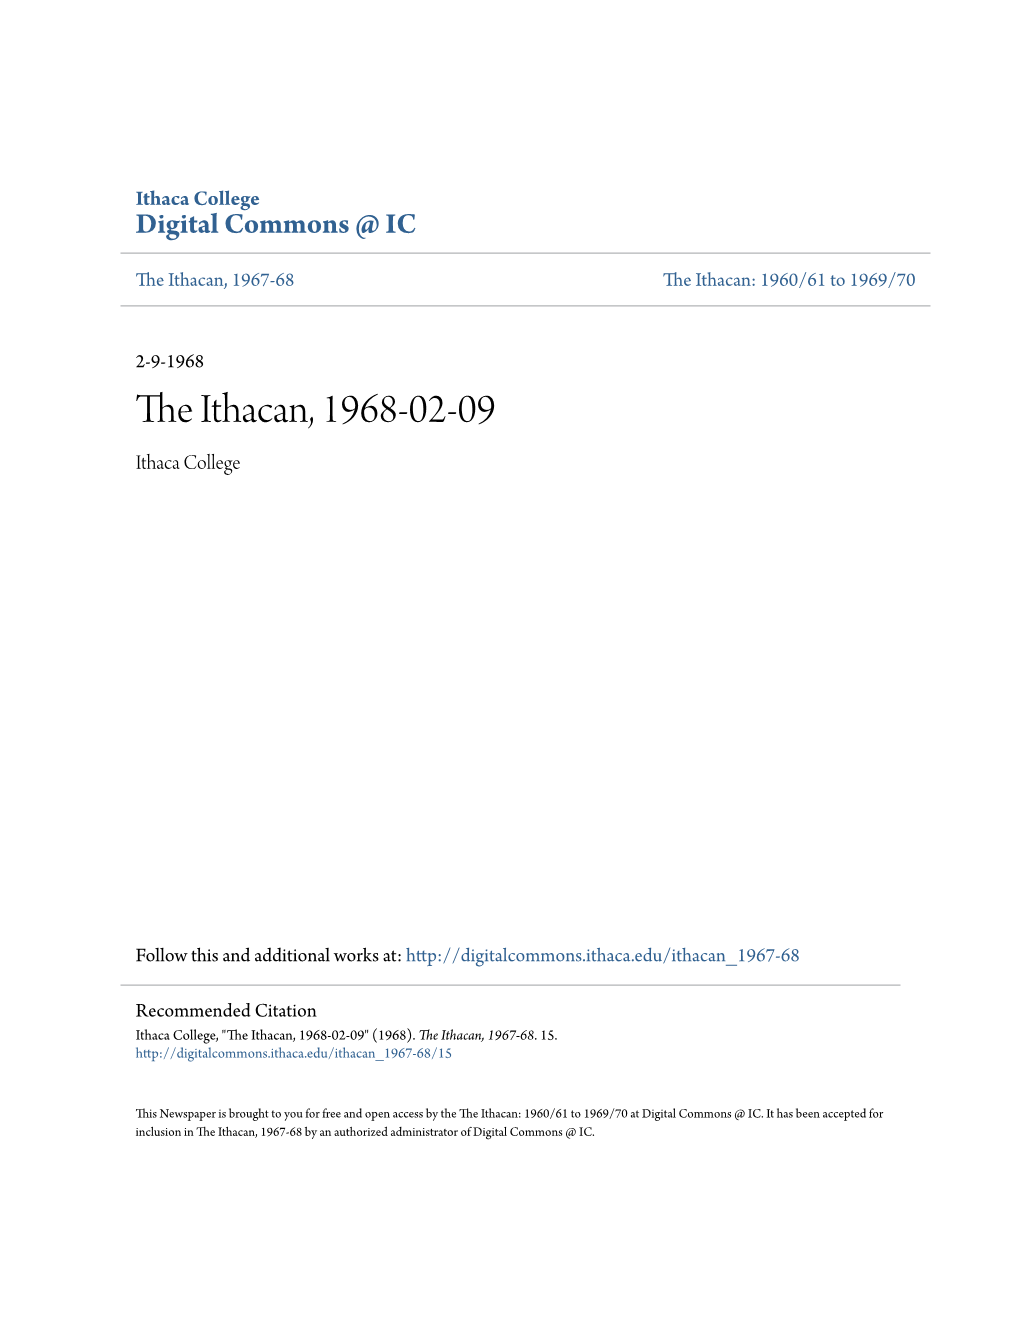 The Ithacan, 1968-02-09